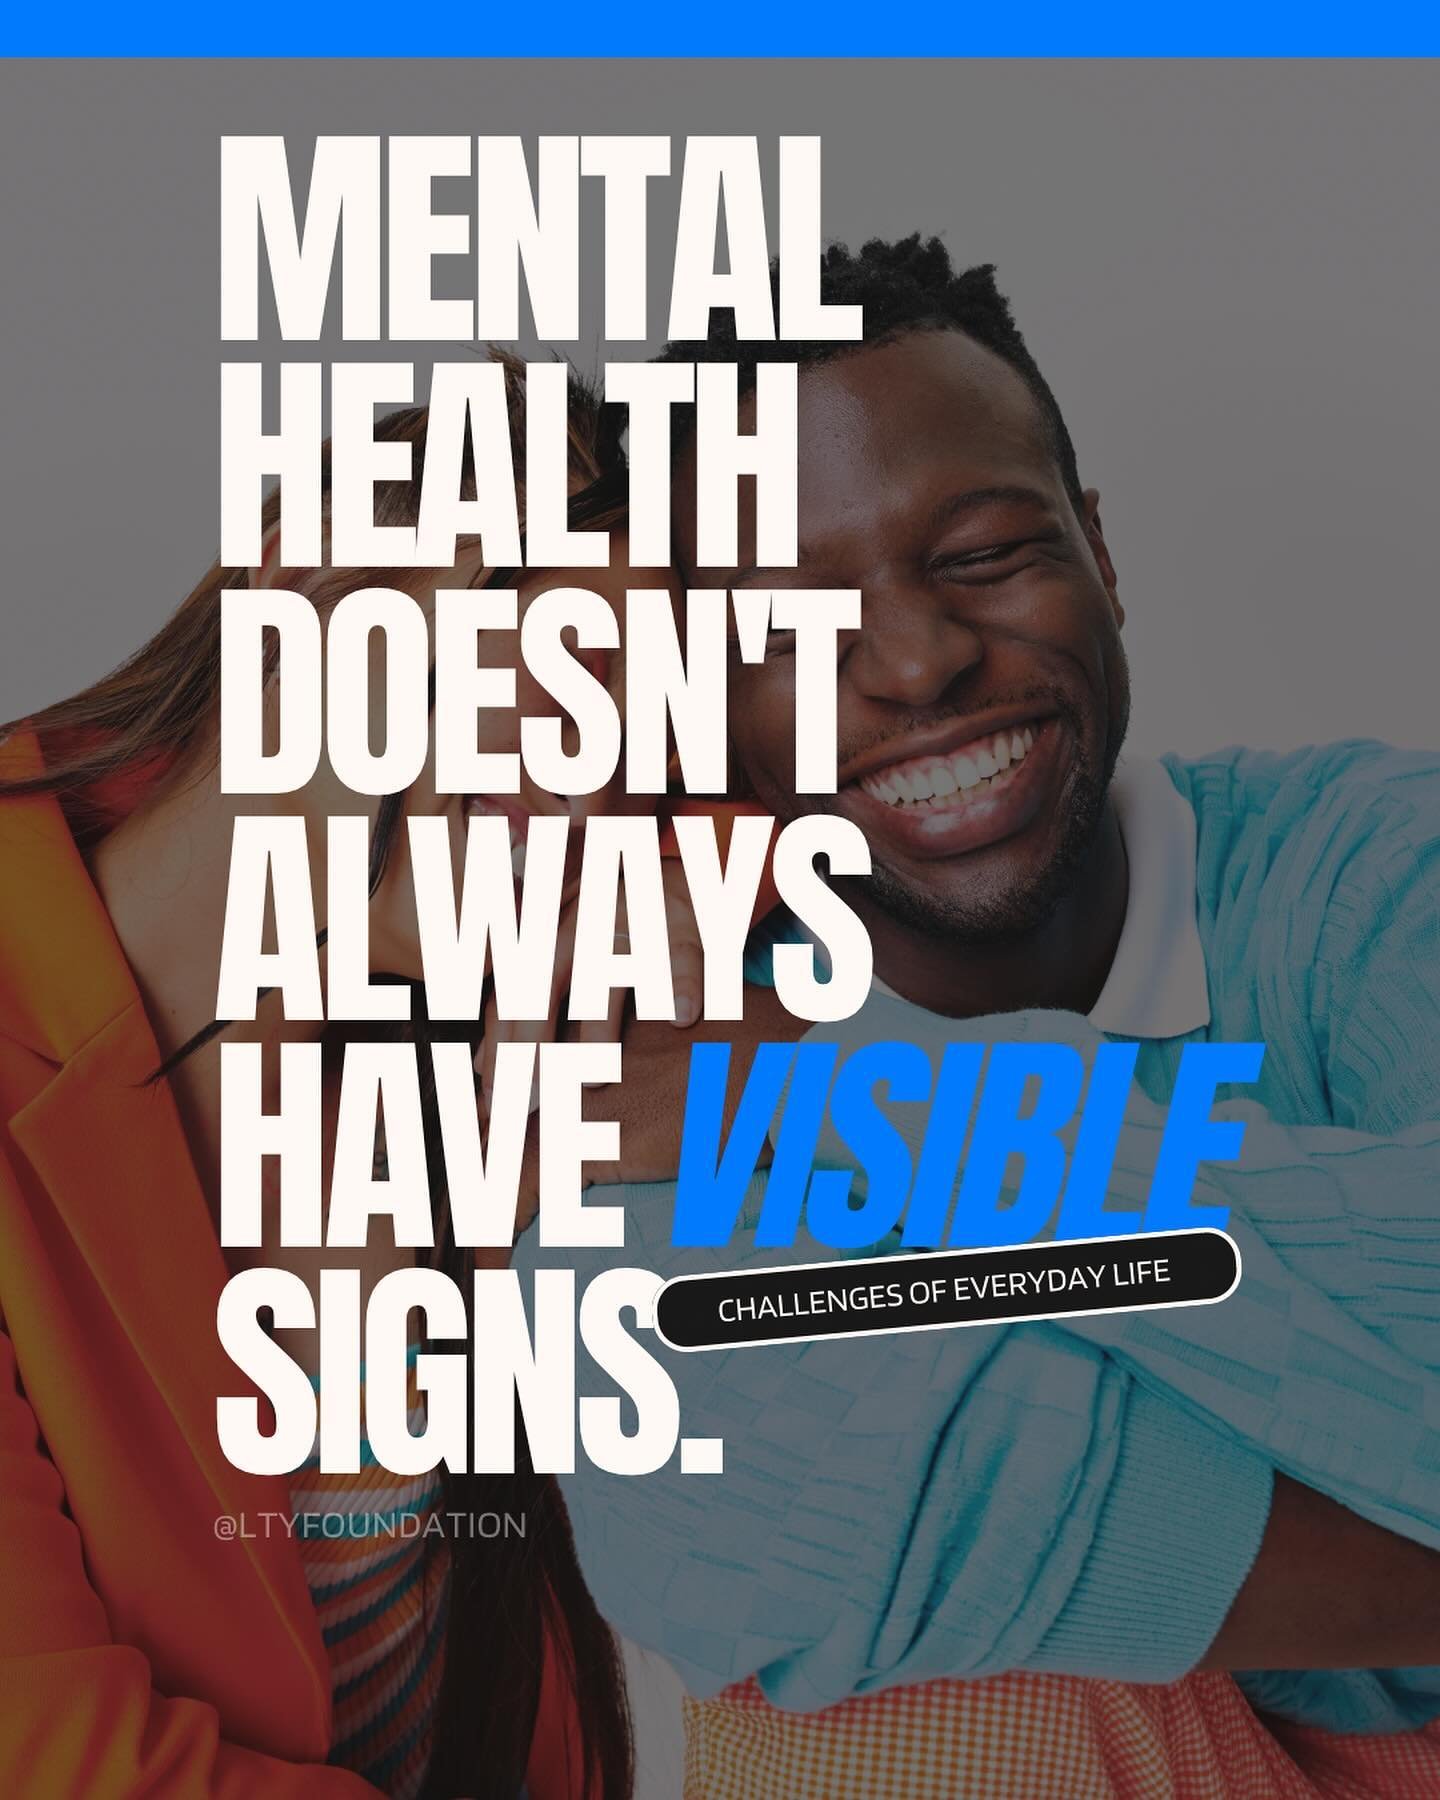 Mental health doesn&rsquo;t always have visible signs.
#mentalhealth